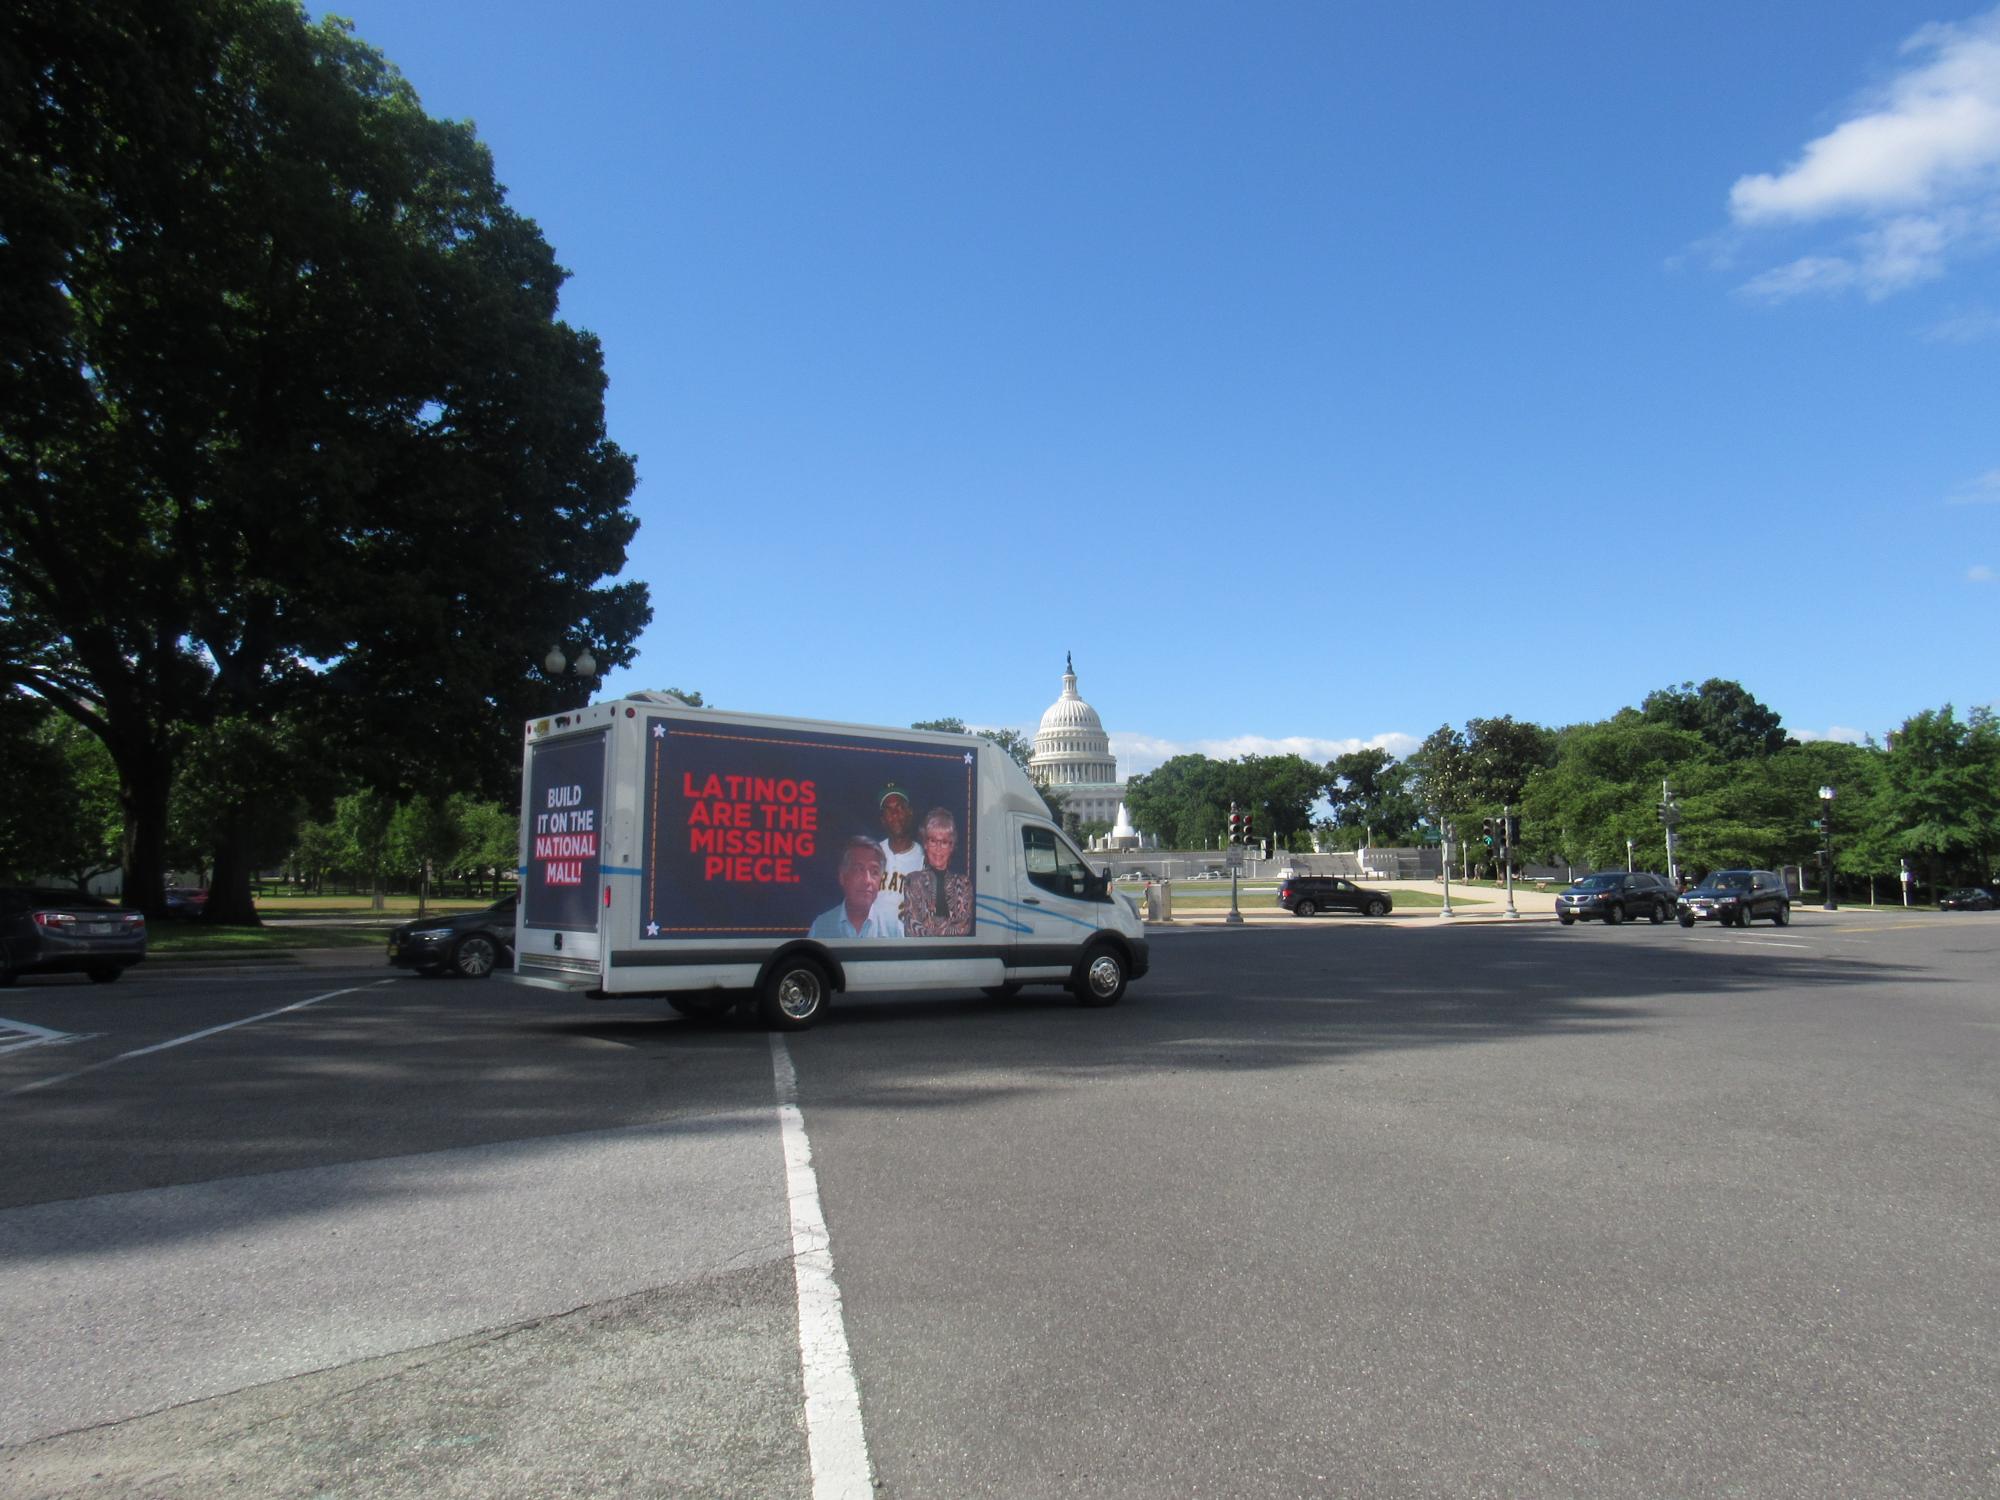 LED mobile billboard truck parked near the U.S. Capitol in Washington DC